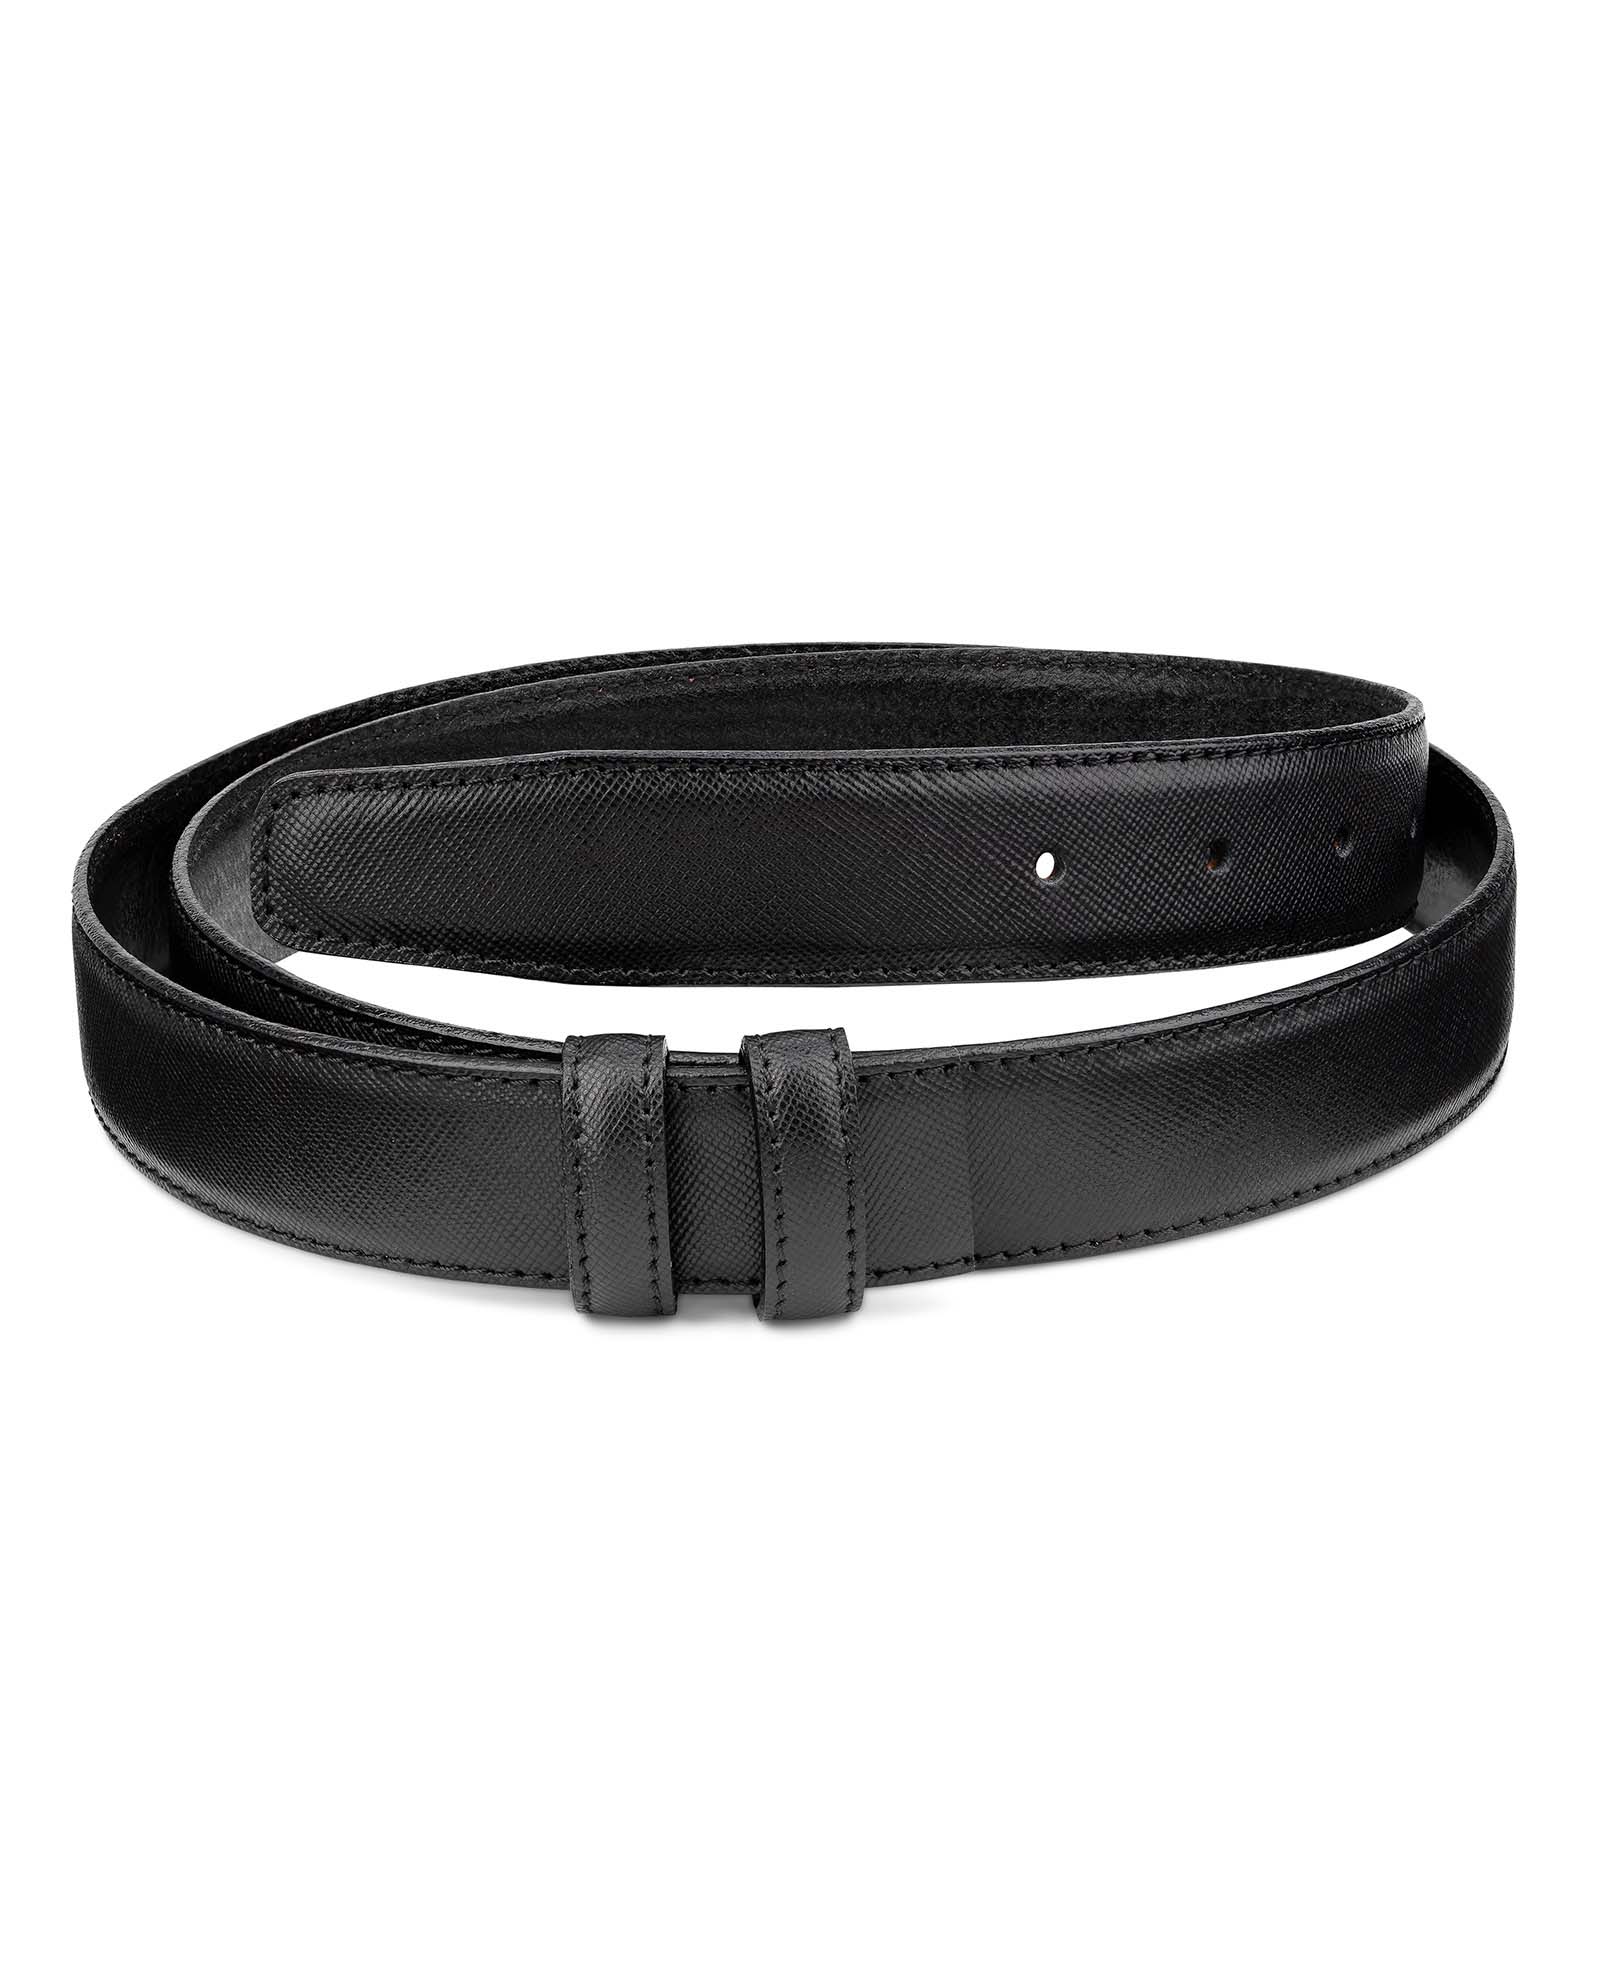 Buy Saffiano Leather 30 mm Replacement Belt Strap | Free Shipping